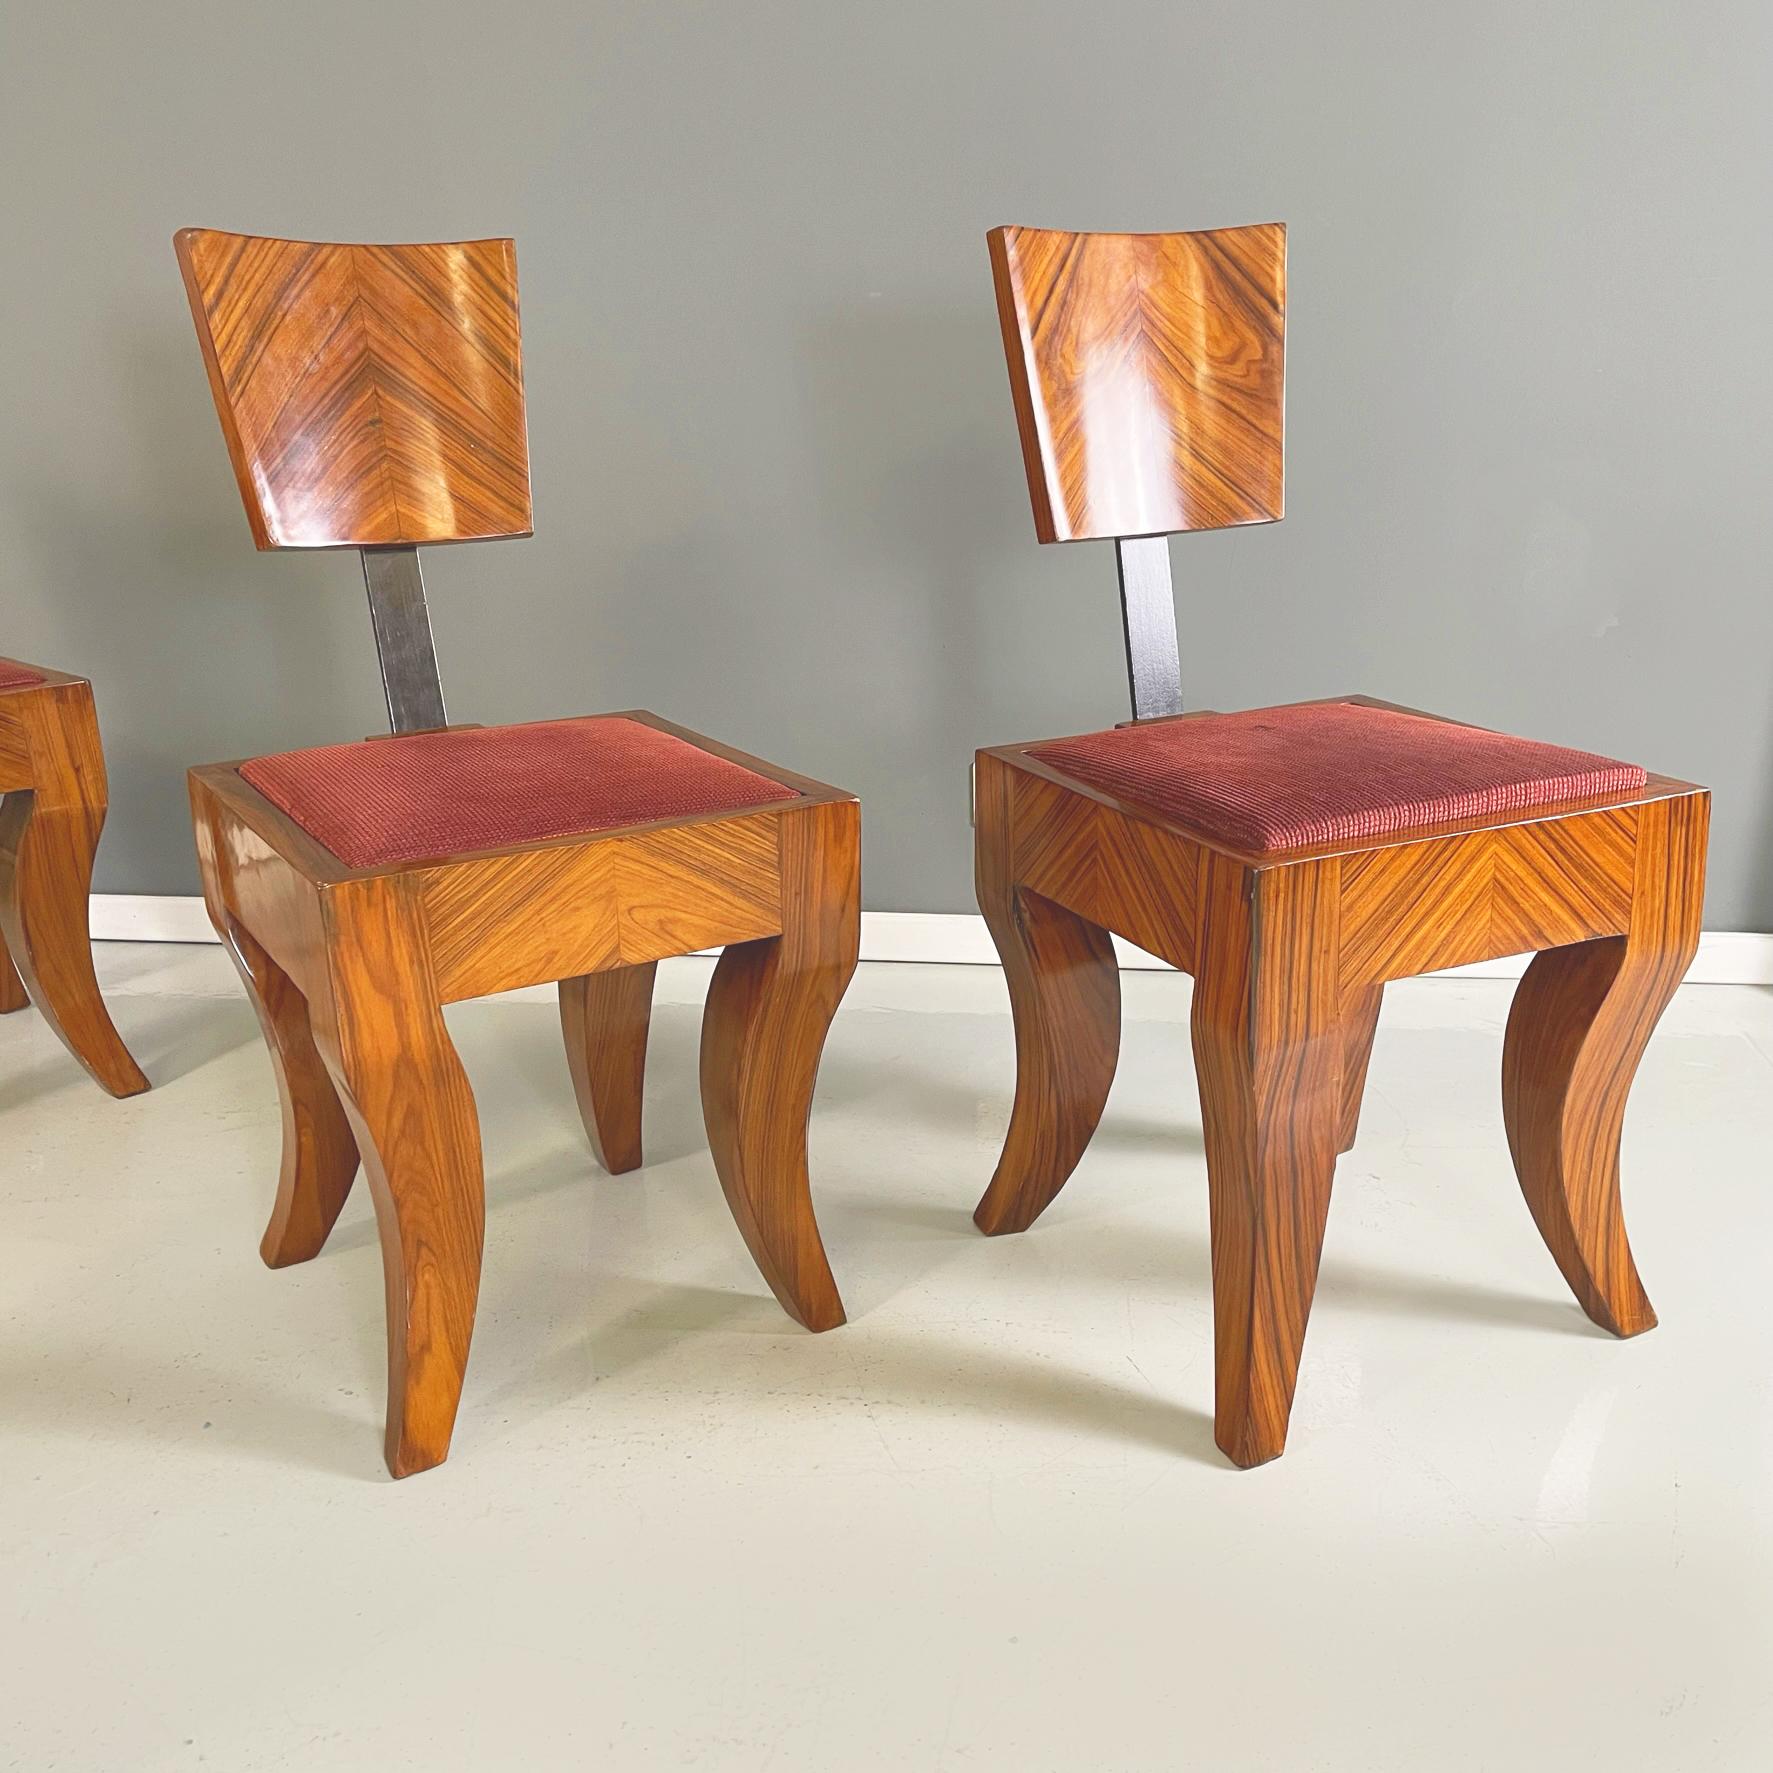 Italian Art Deco Chairs in Solid Wood, Black Metal and Red Fabric, 1920s-1930s In Good Condition For Sale In MIlano, IT